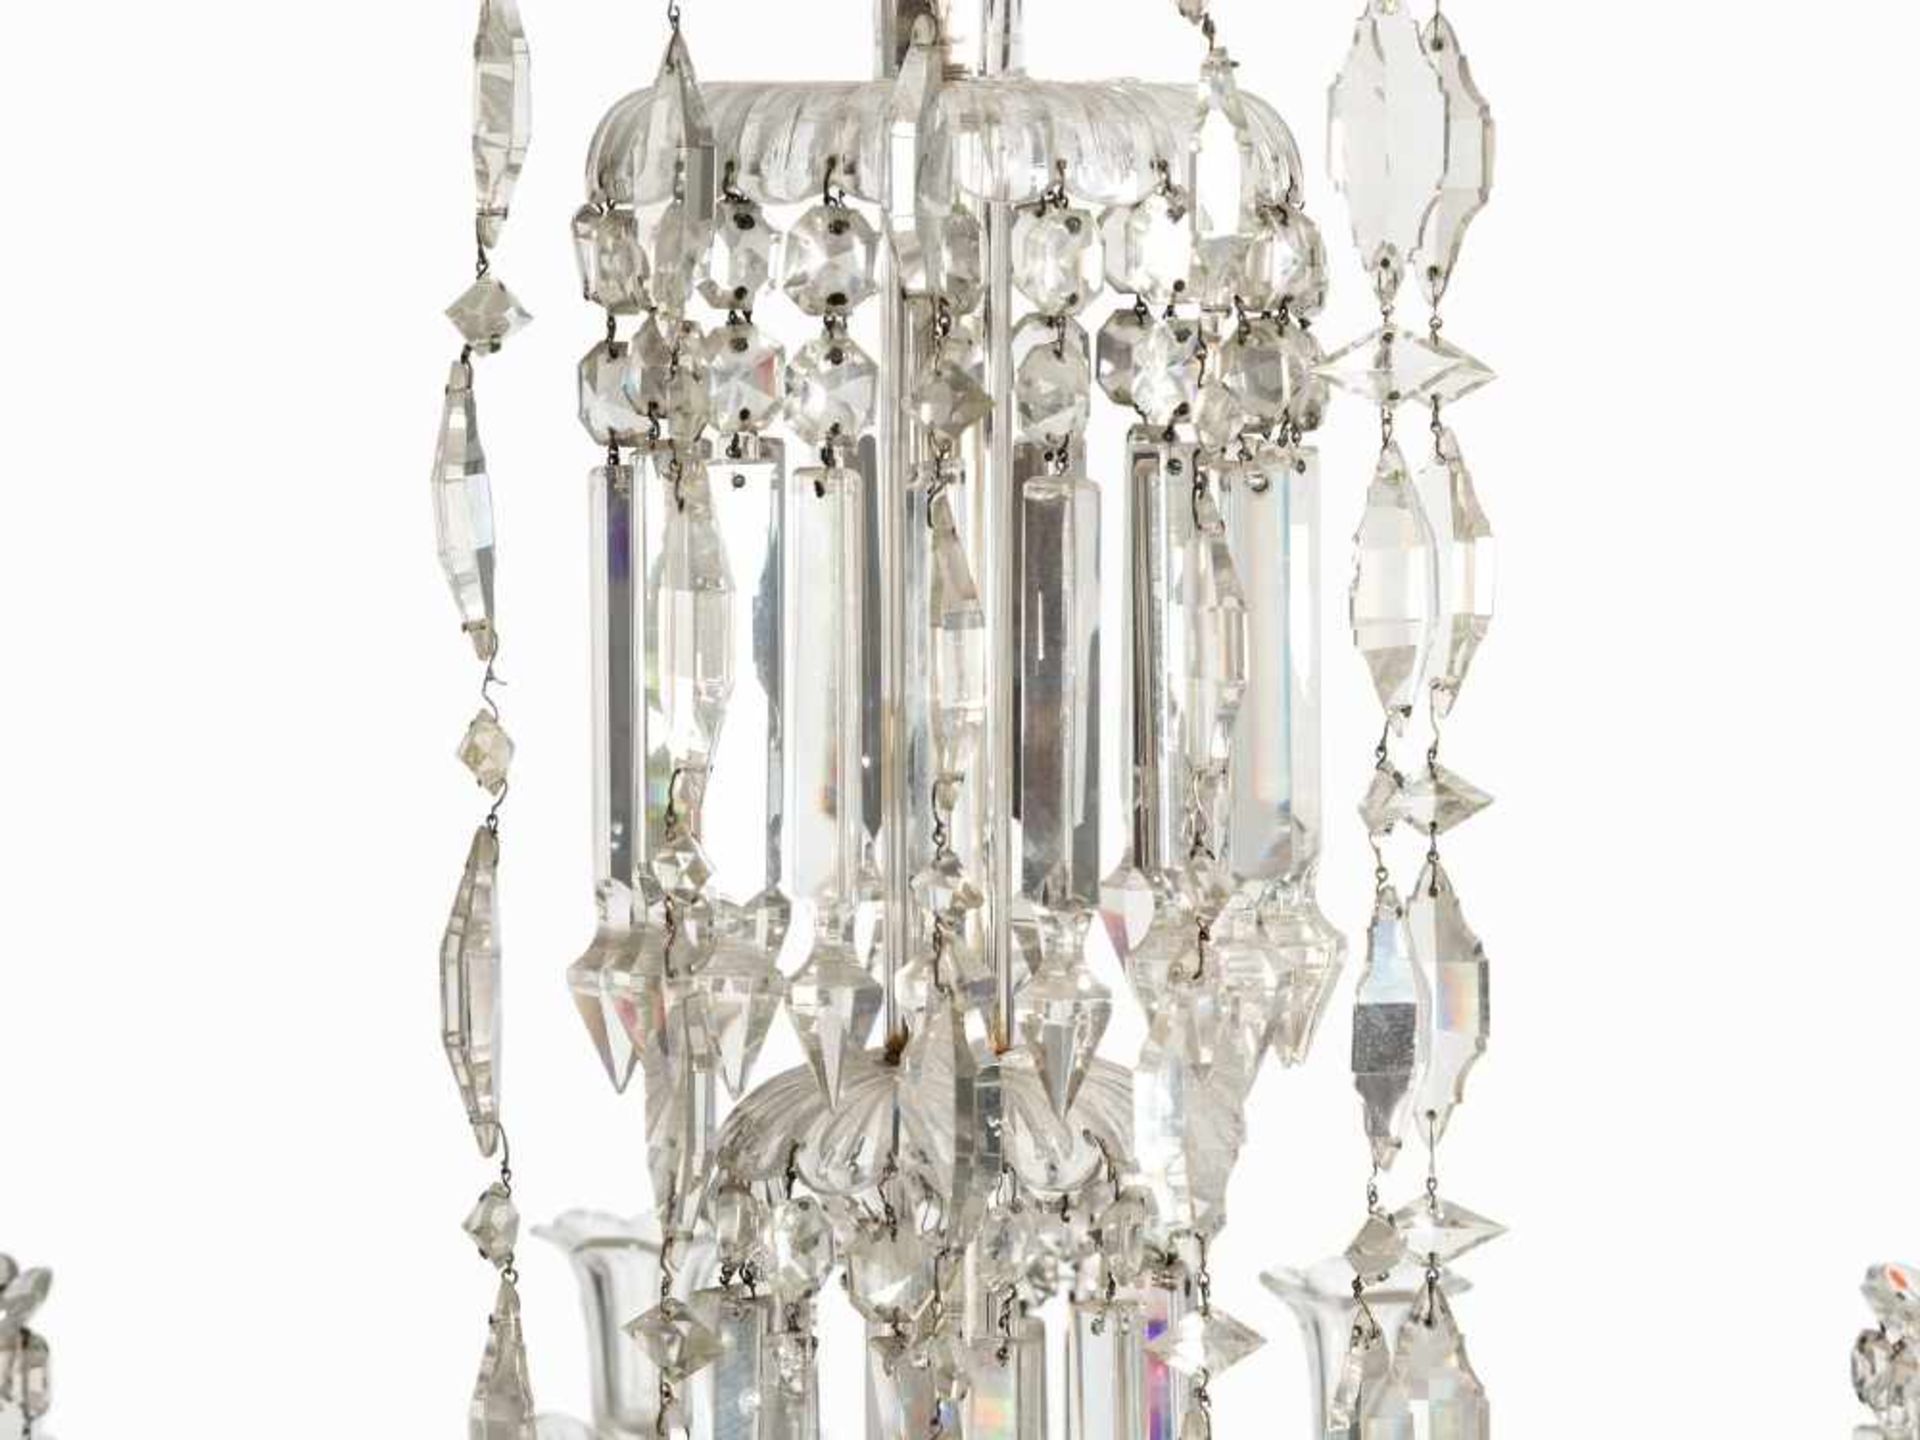 Magnificent Baccarat Chandelier, France, 19th C. Baccarat crystal France, 19th century 30 electric - Image 8 of 10